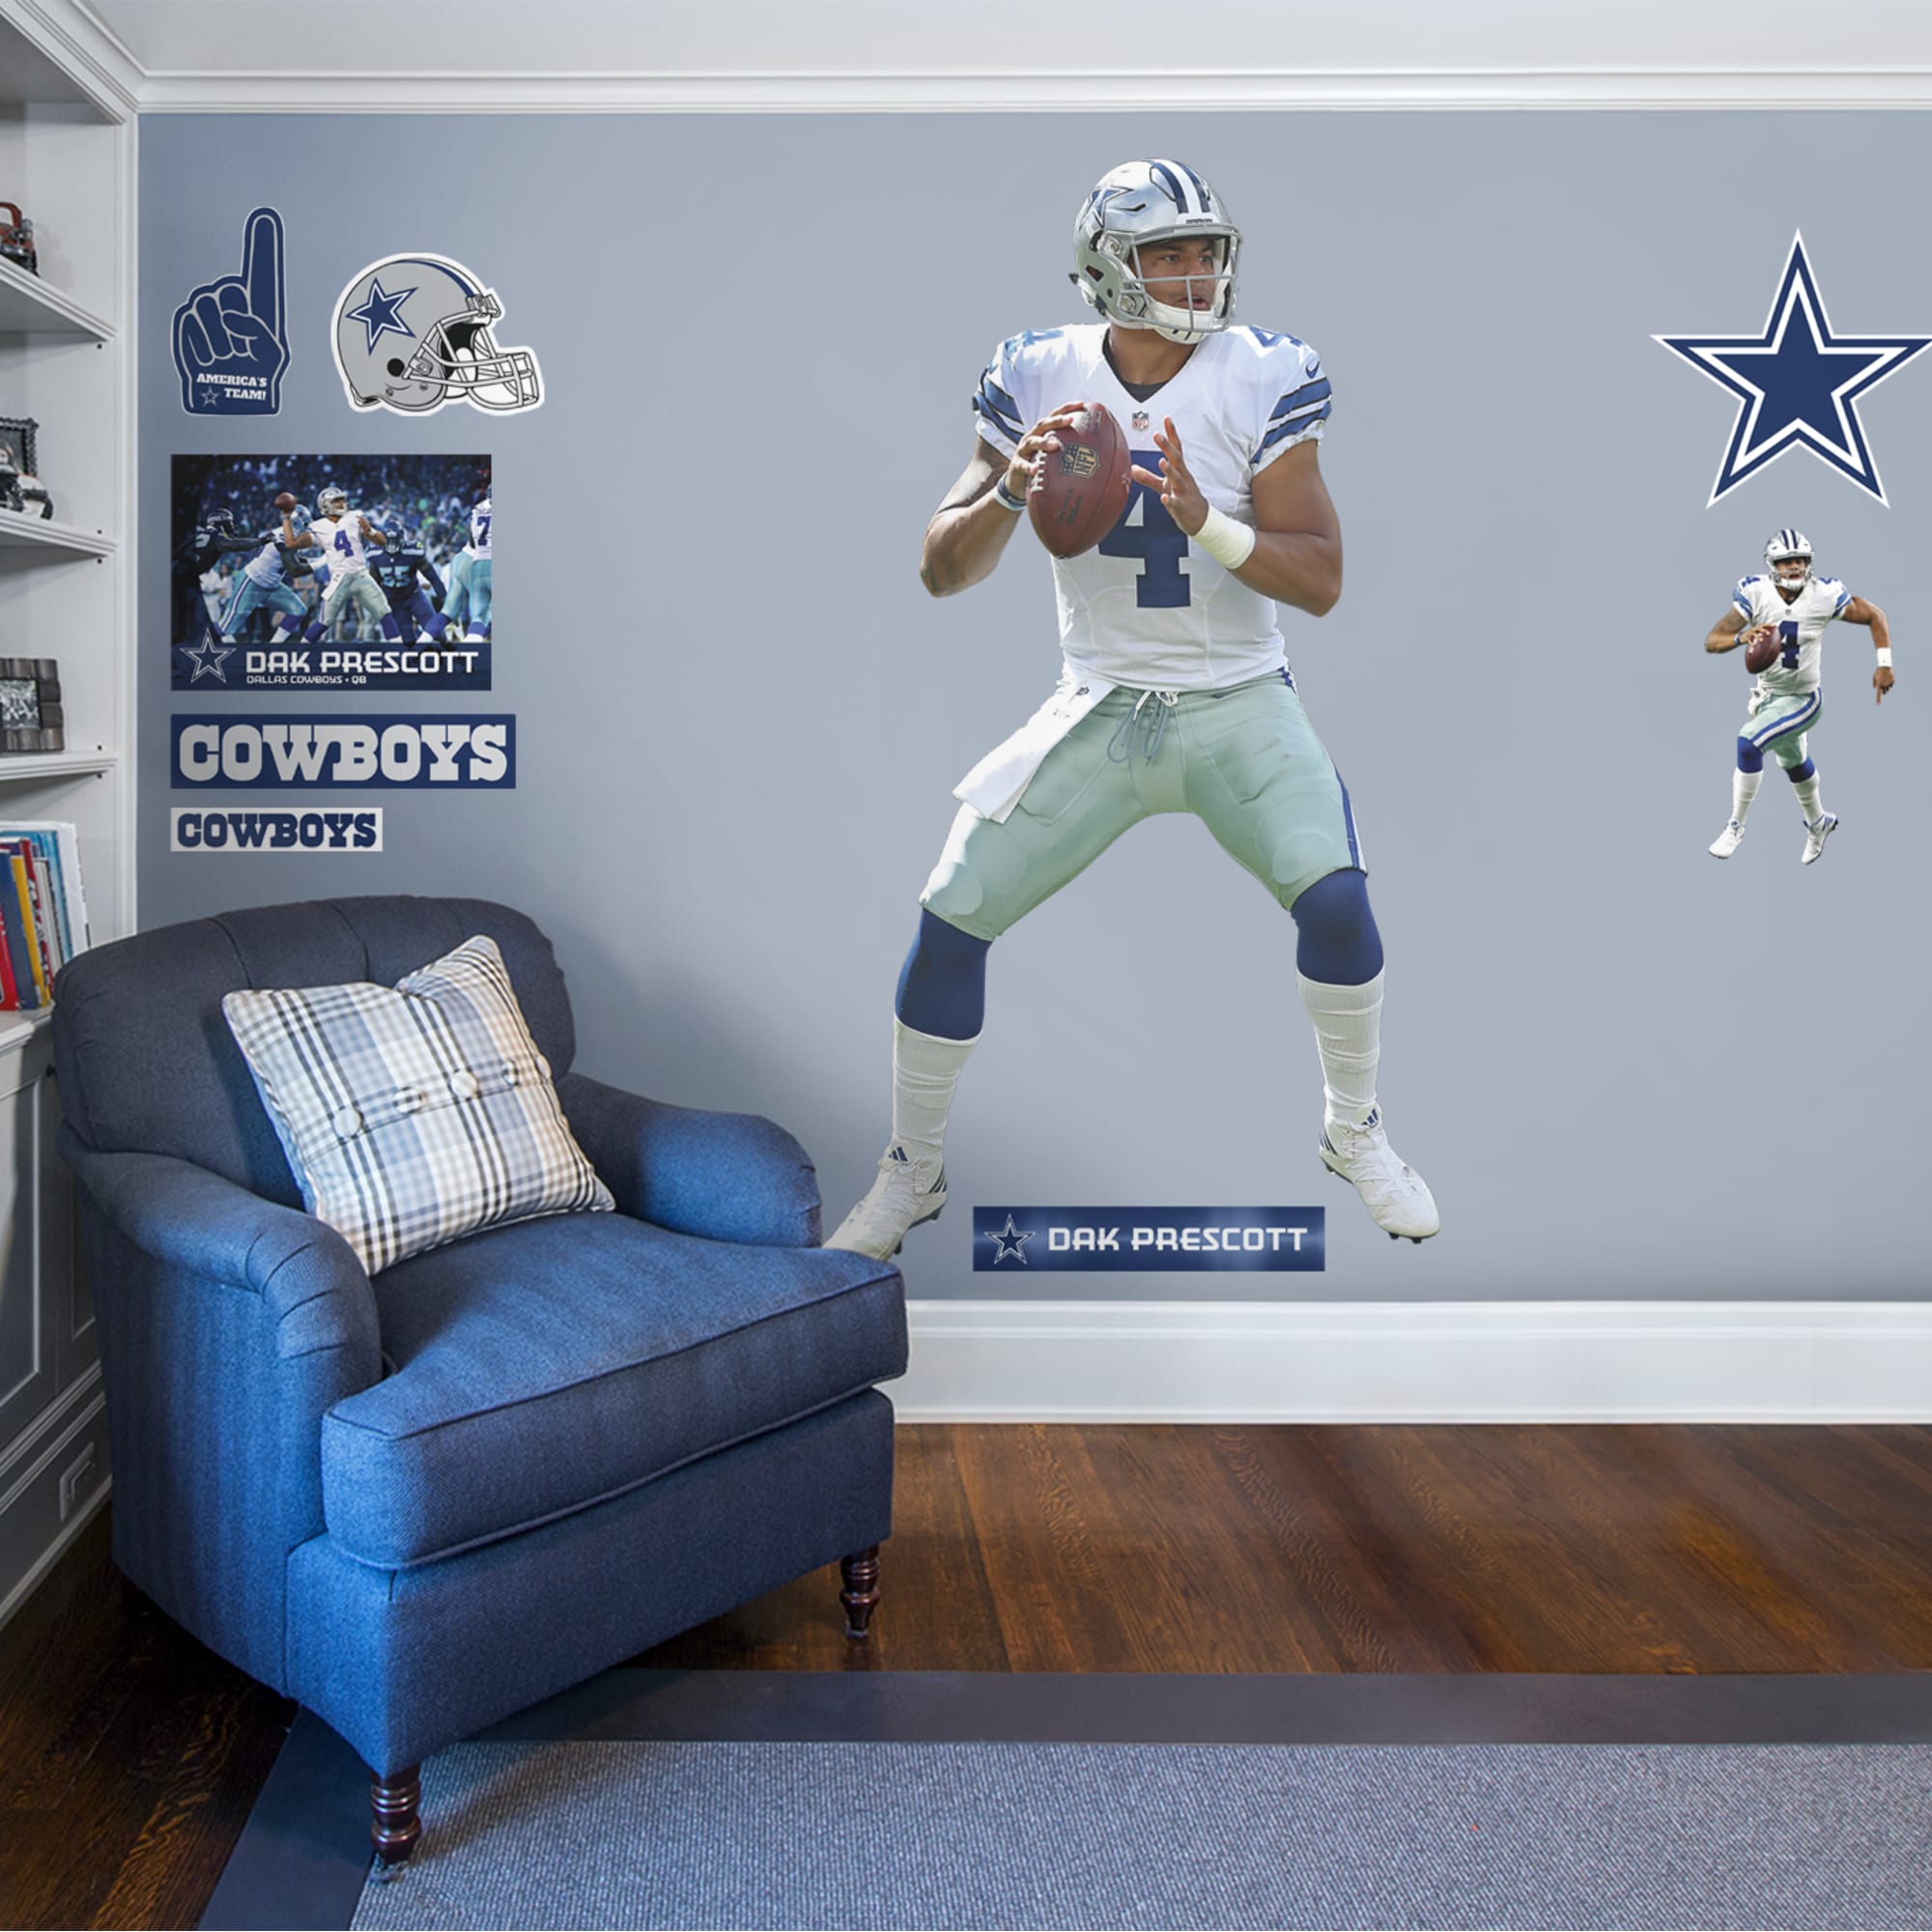 Dak Prescott for Dallas Cowboys - Officially Licensed NFL Removable Wall Decal Life-Size Athlete + 10 Decals (43"W x 78"H) by Fa